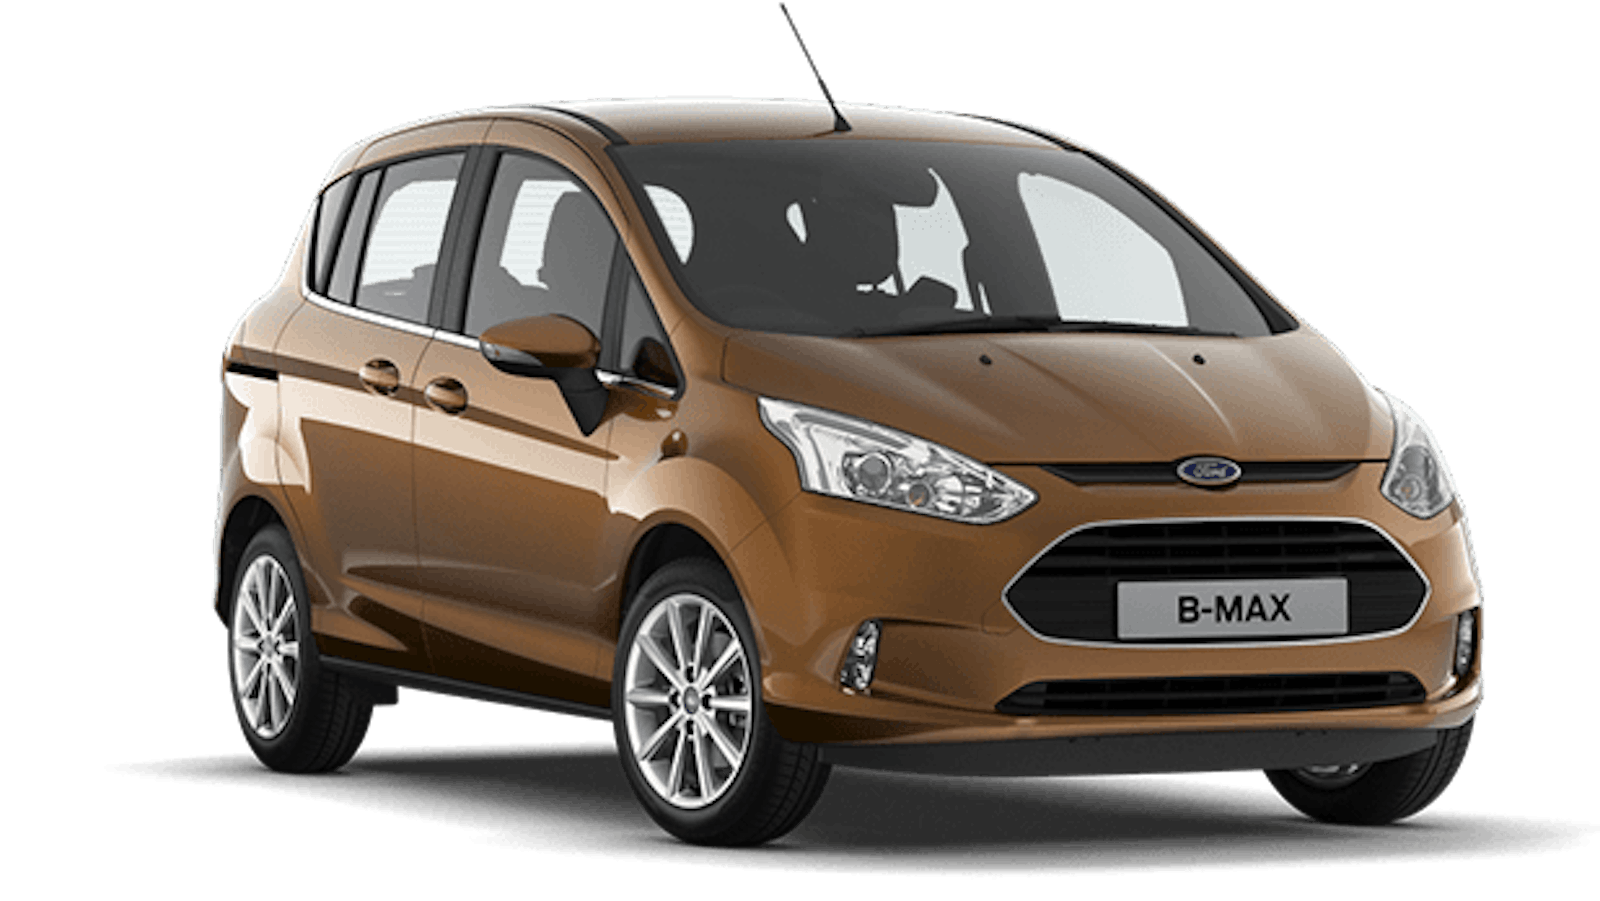 Ford b max prices uk